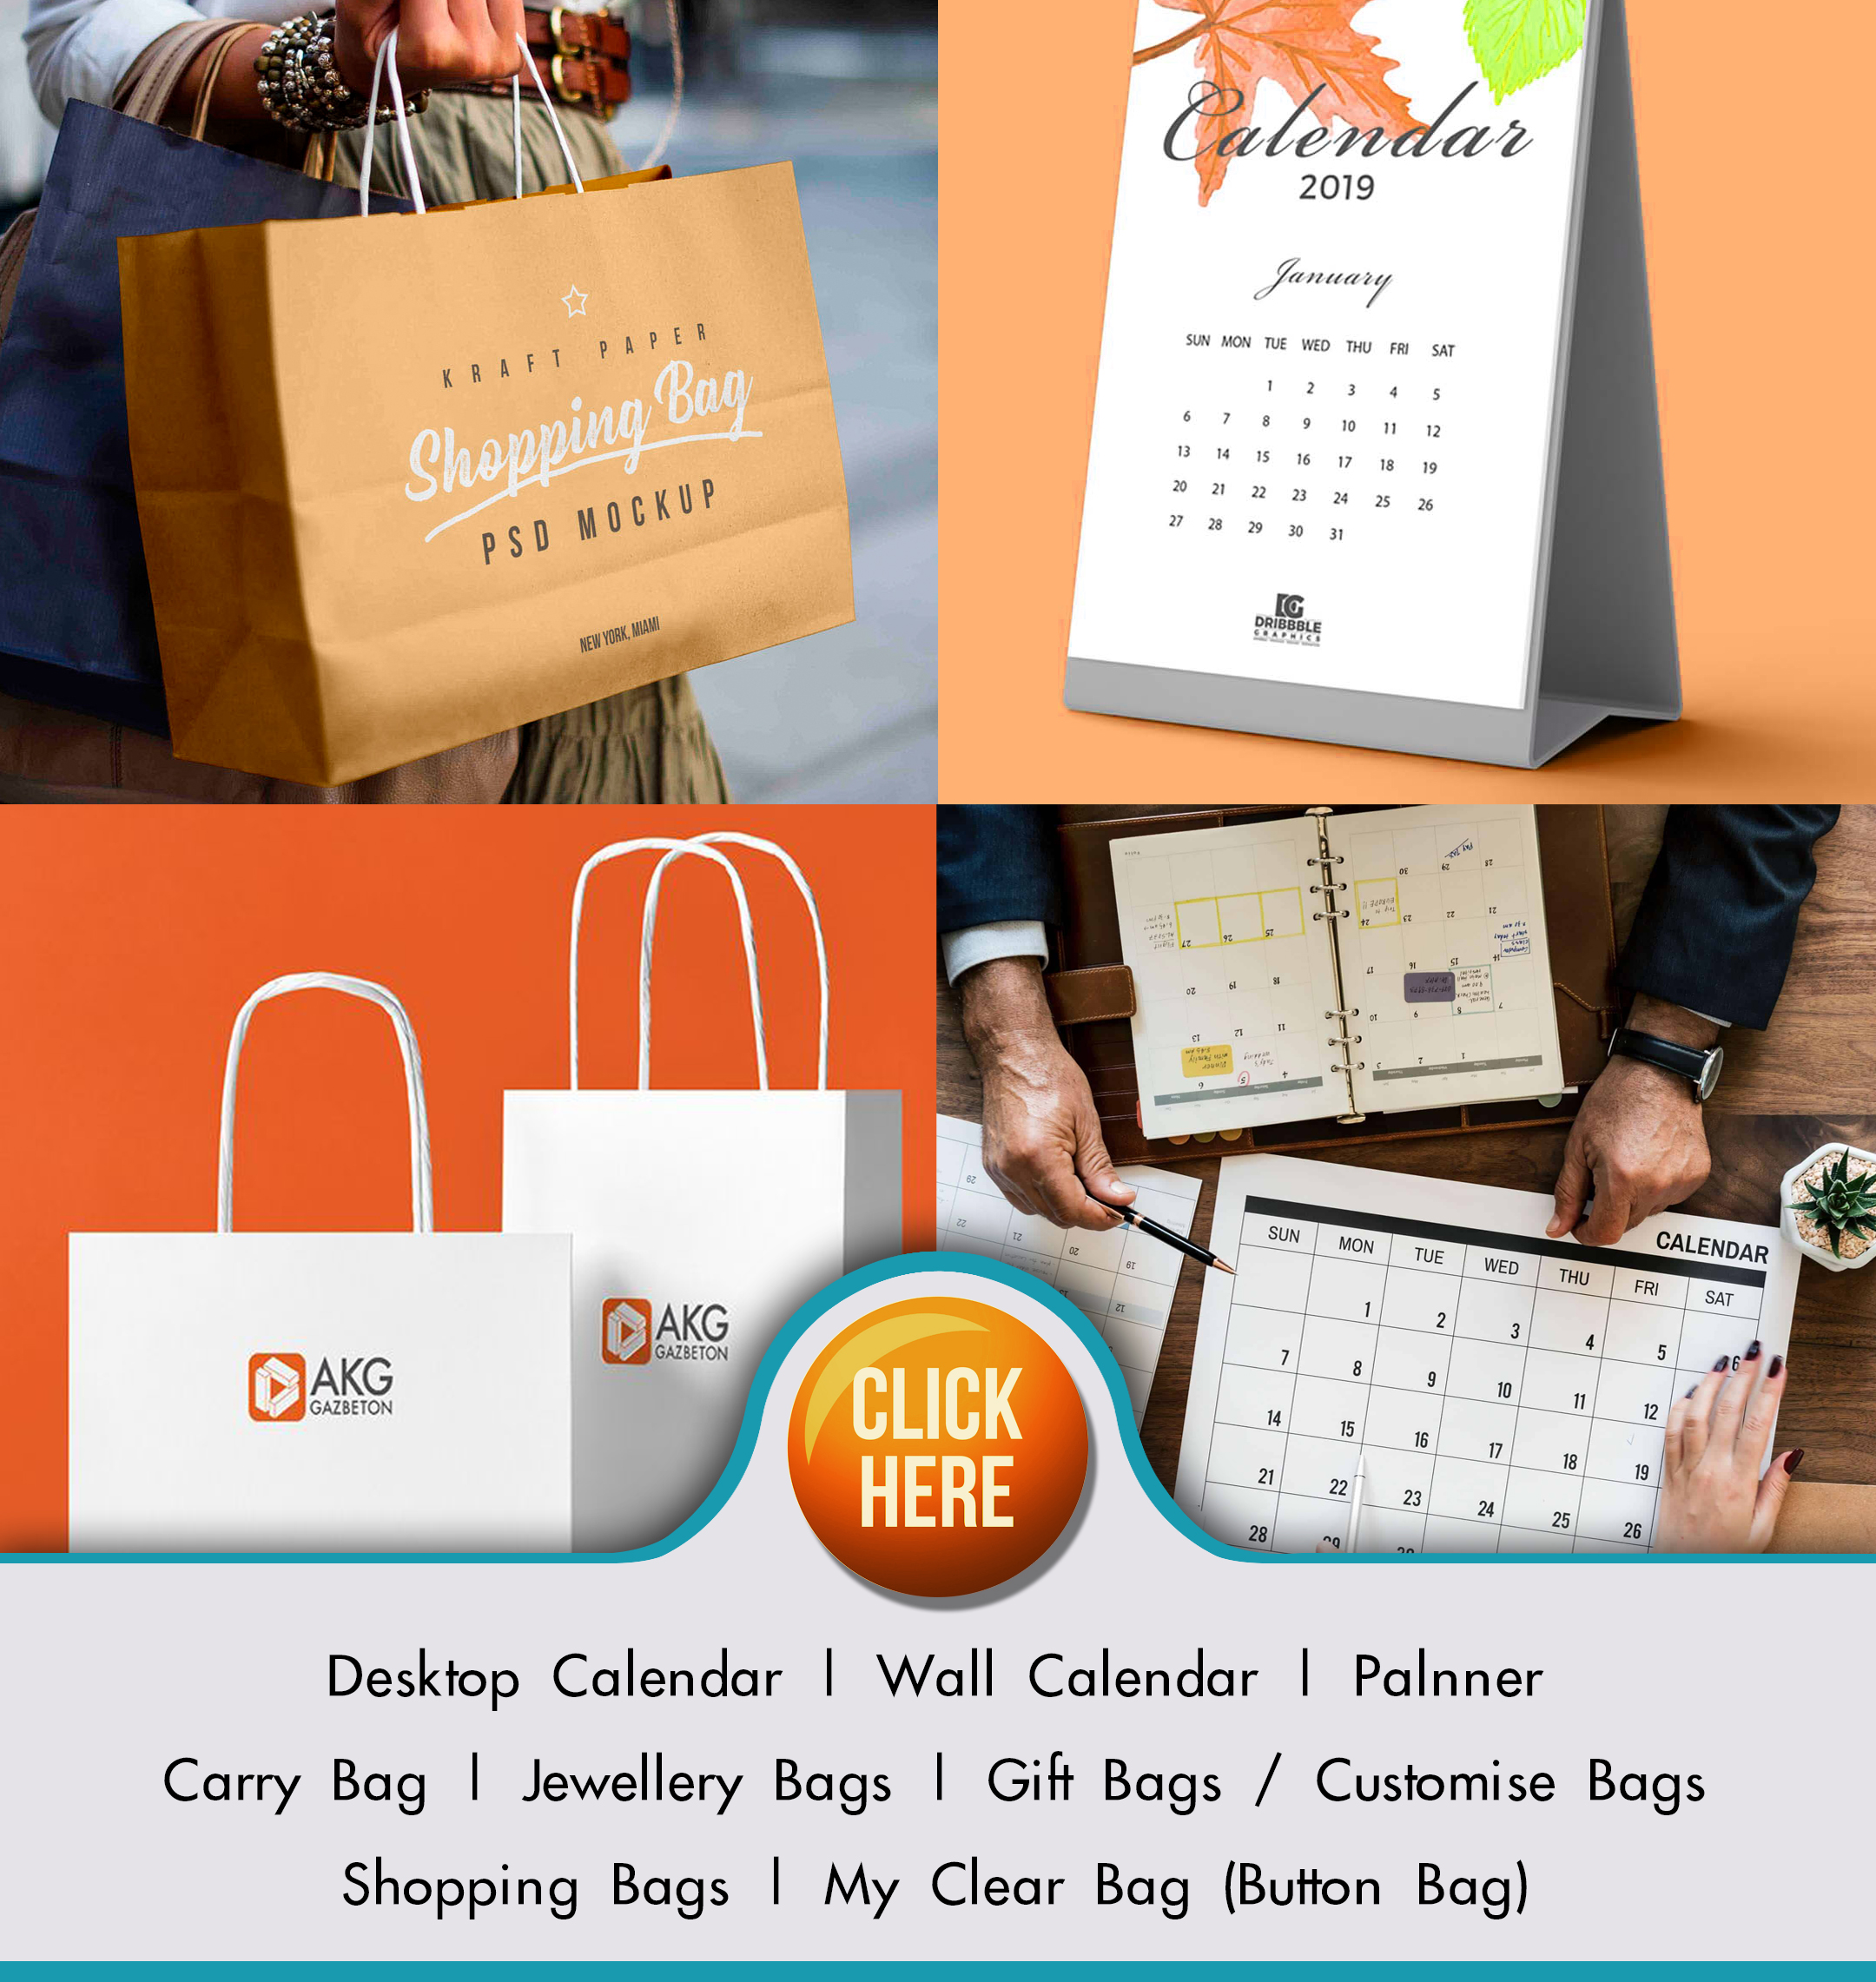 Calender – Carry Bags